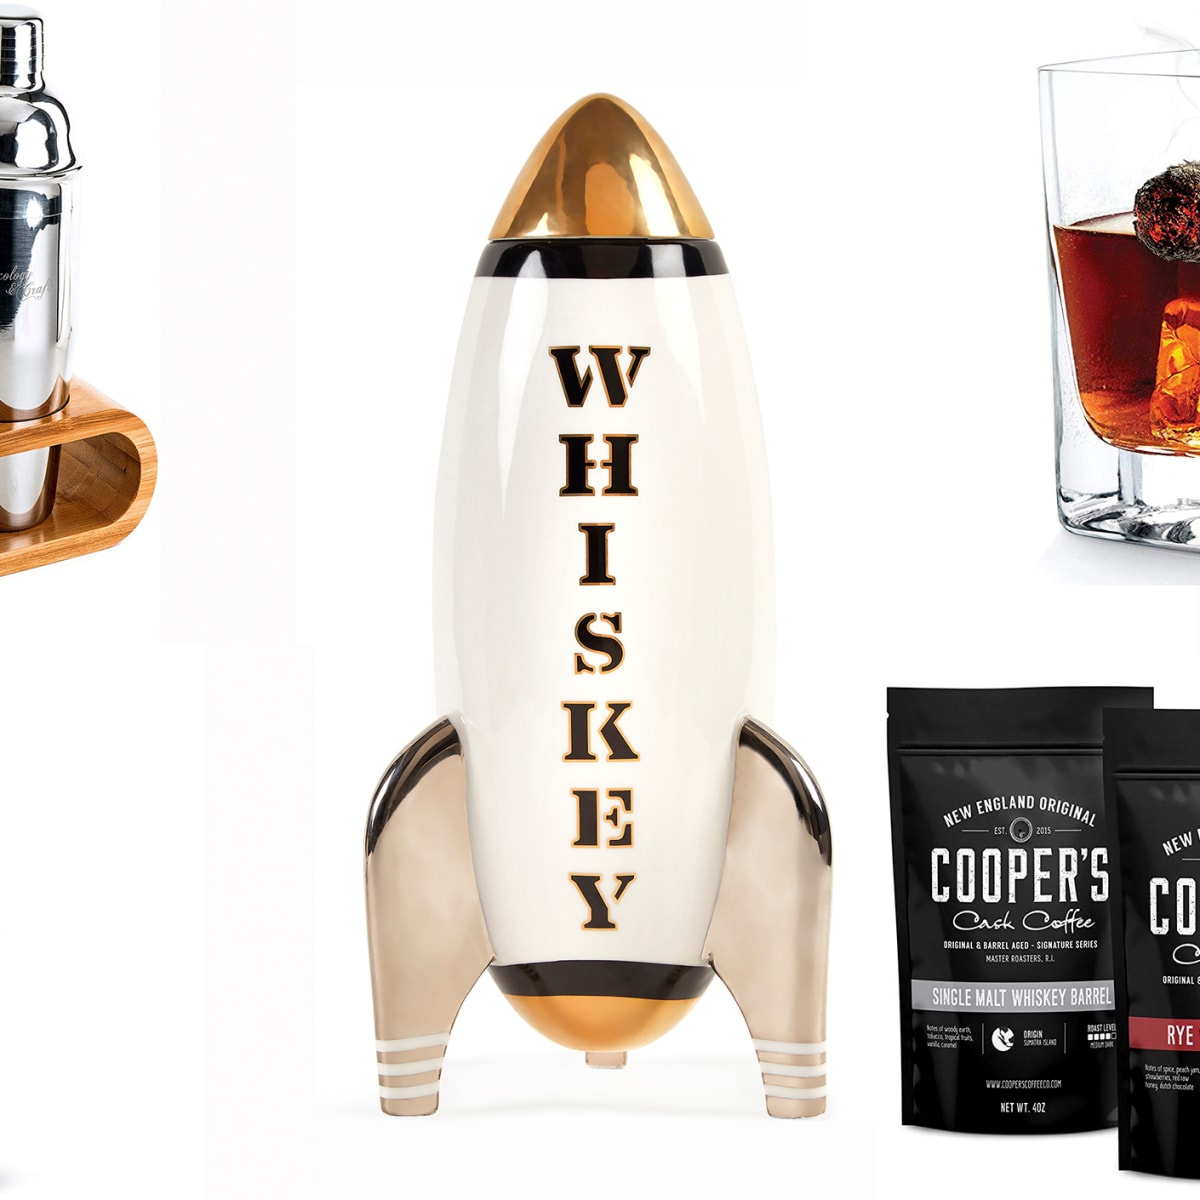 Oakhill Personalized Whiskey and Watch Gifts for Men for Whiskey Bourbon Scotch Lovers - Home Wet Bar